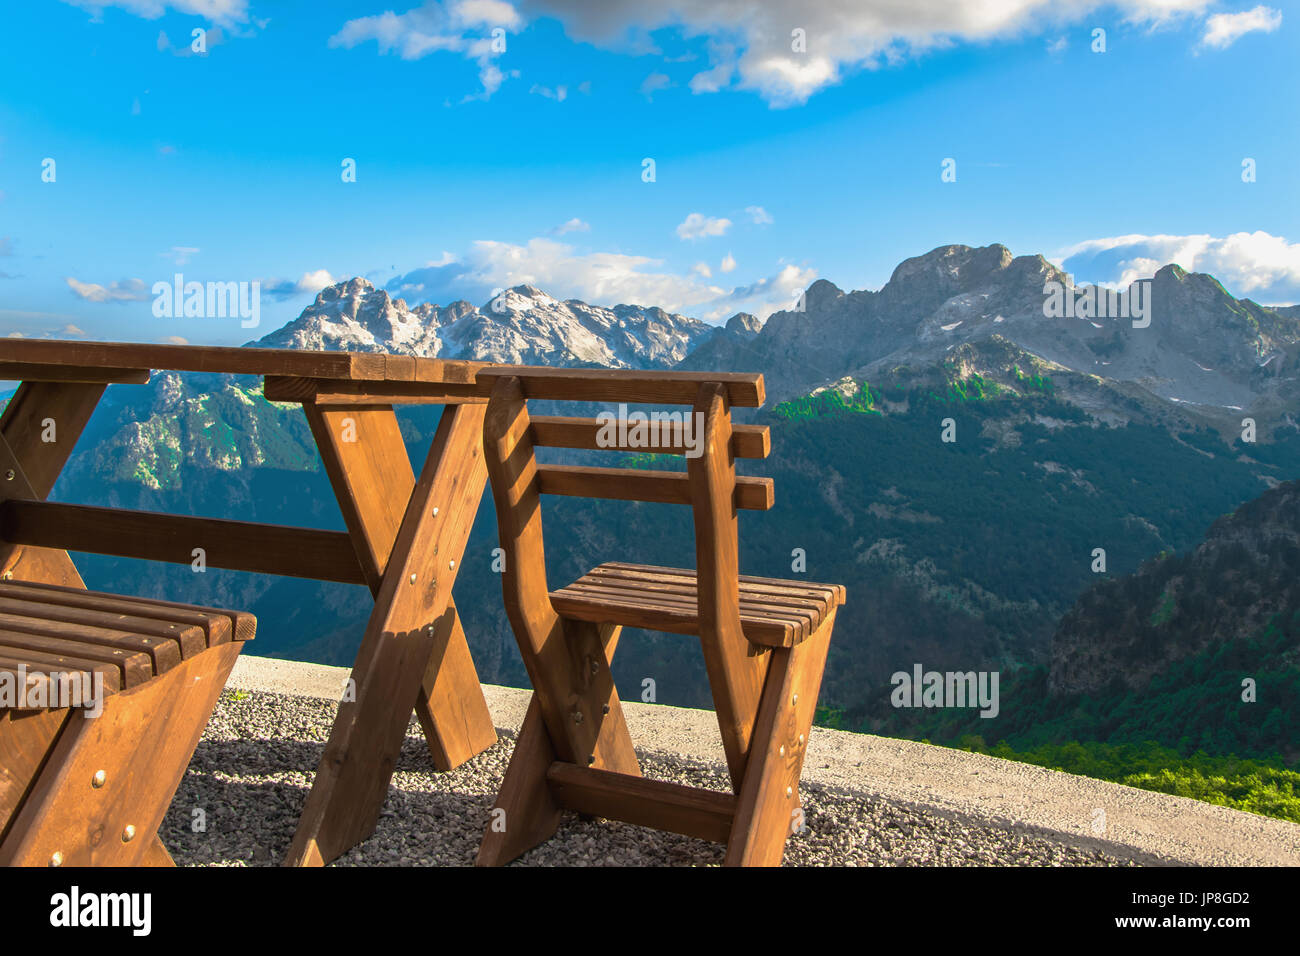 Rural cozy chairs for resting in the highmountain Stock Photo